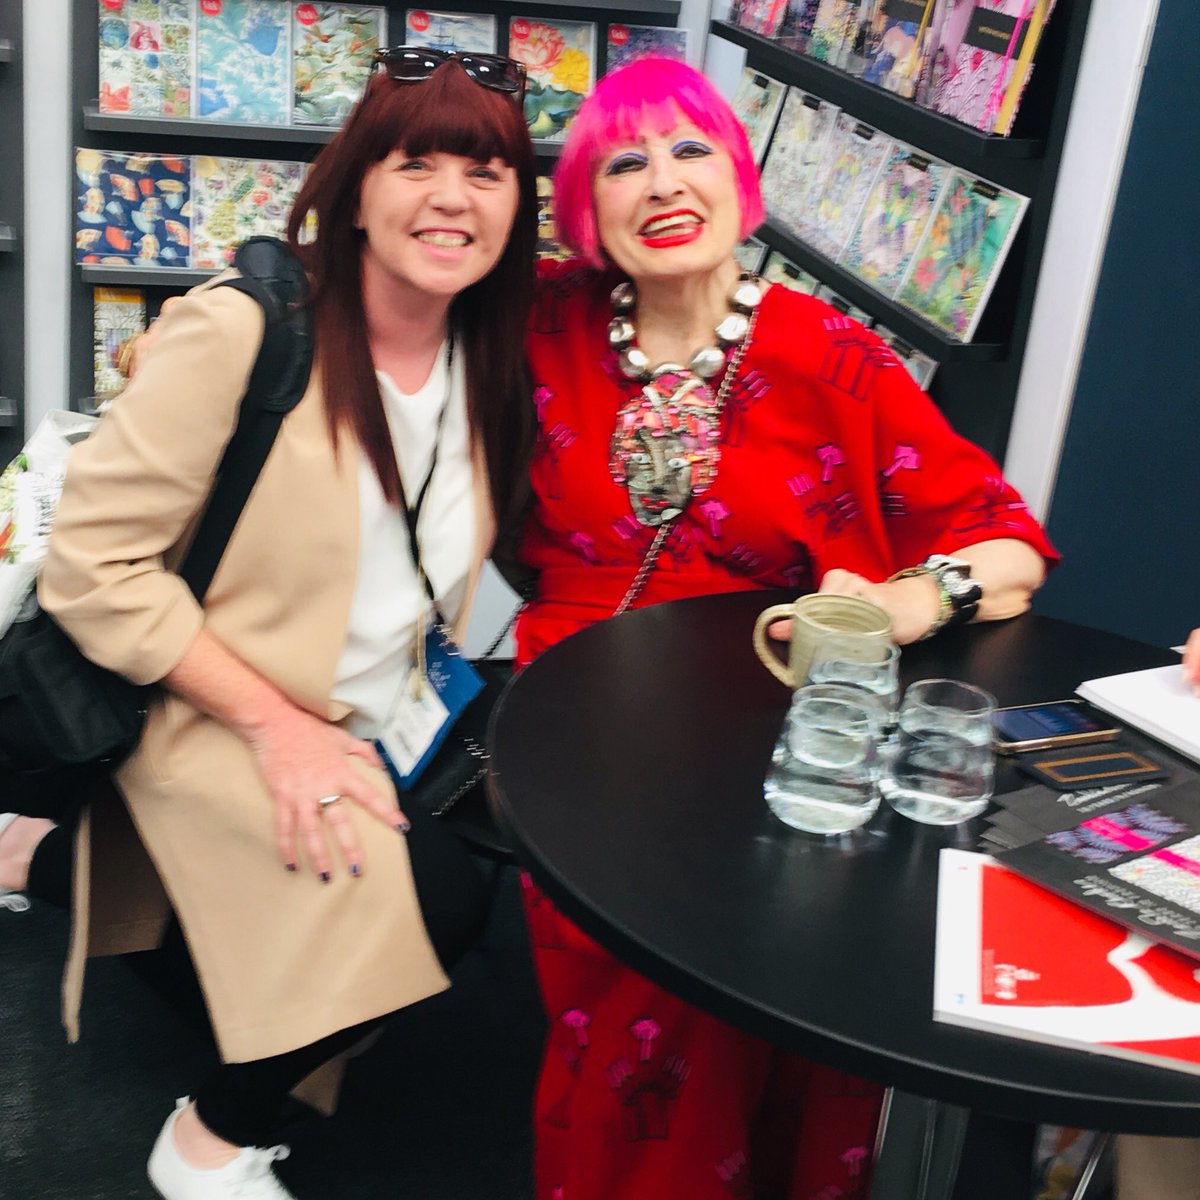 Our Sarah absolutely thrilled to meet one of her idols! @Zandra_Rhodes at the launch the new range by partners @mgml_uk #pglive2019 #pglive #zandrarhodes #design #stationery #cards #gift #wrap #ffro #fashion #idols #powerinartanddesign